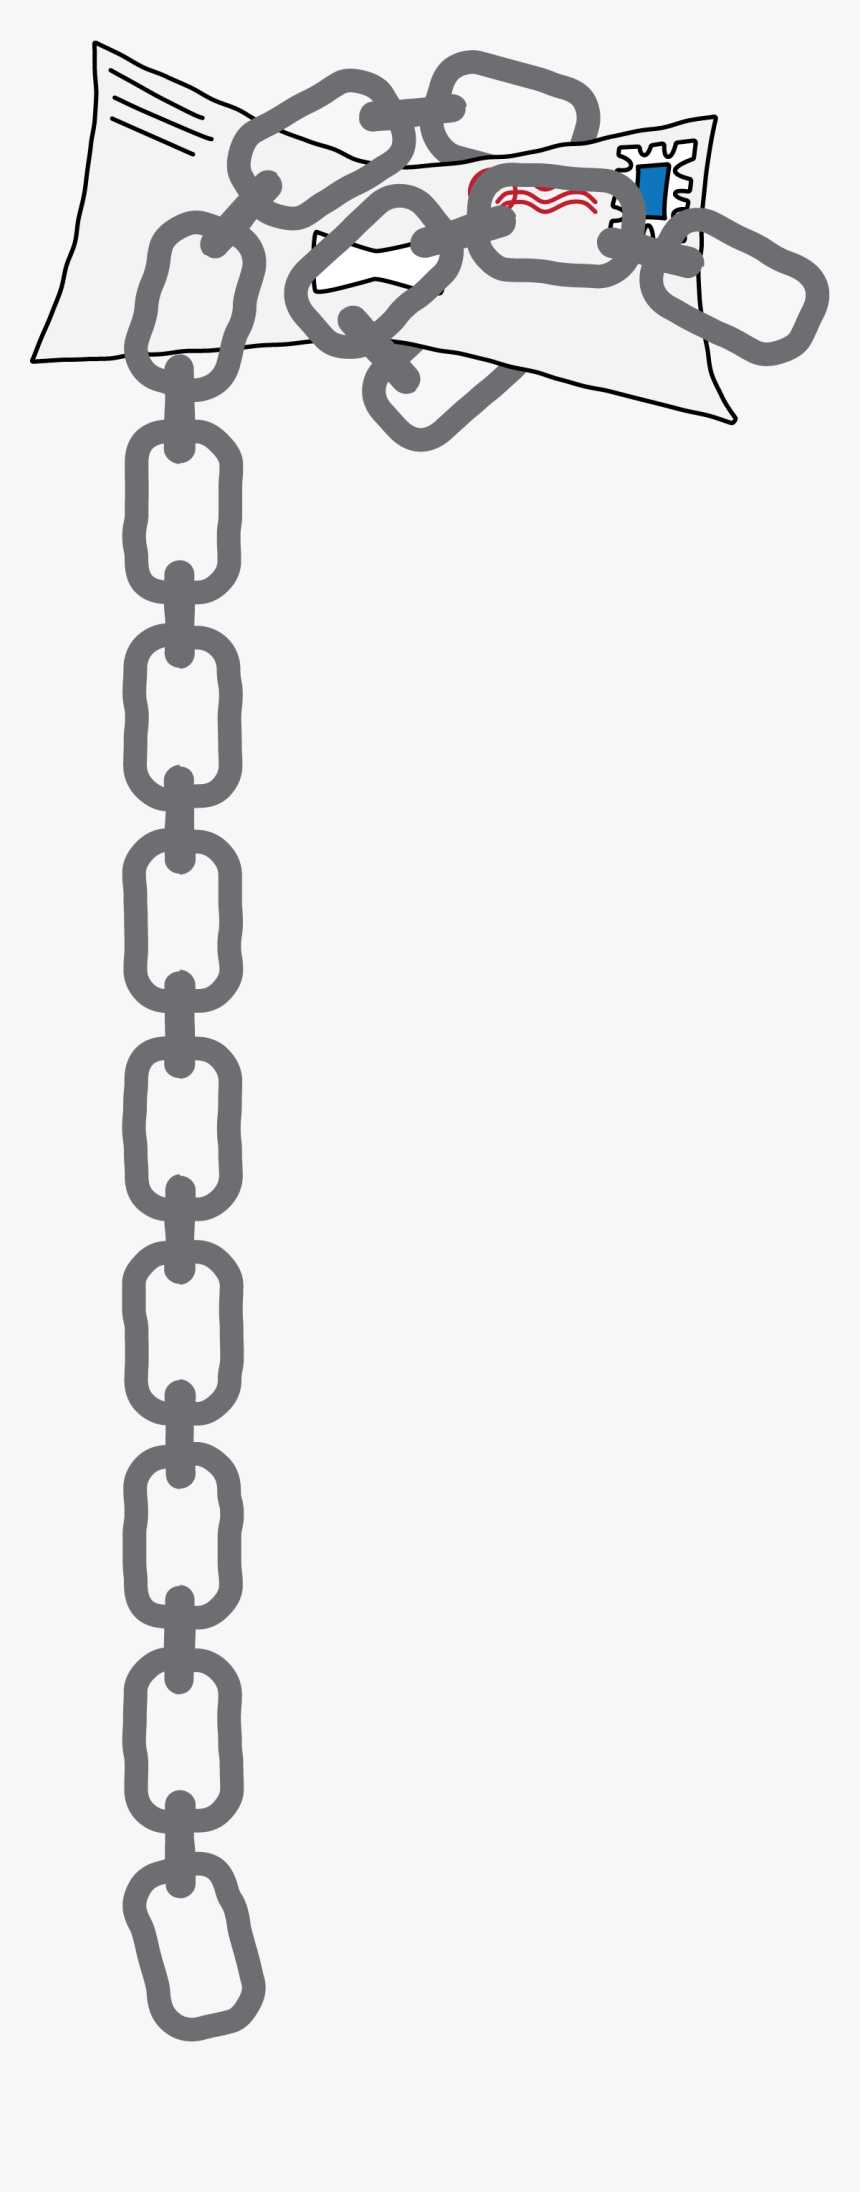 Construction Payment Chain Holds Your Check Hostage - Chain, HD Png Download, Free Download